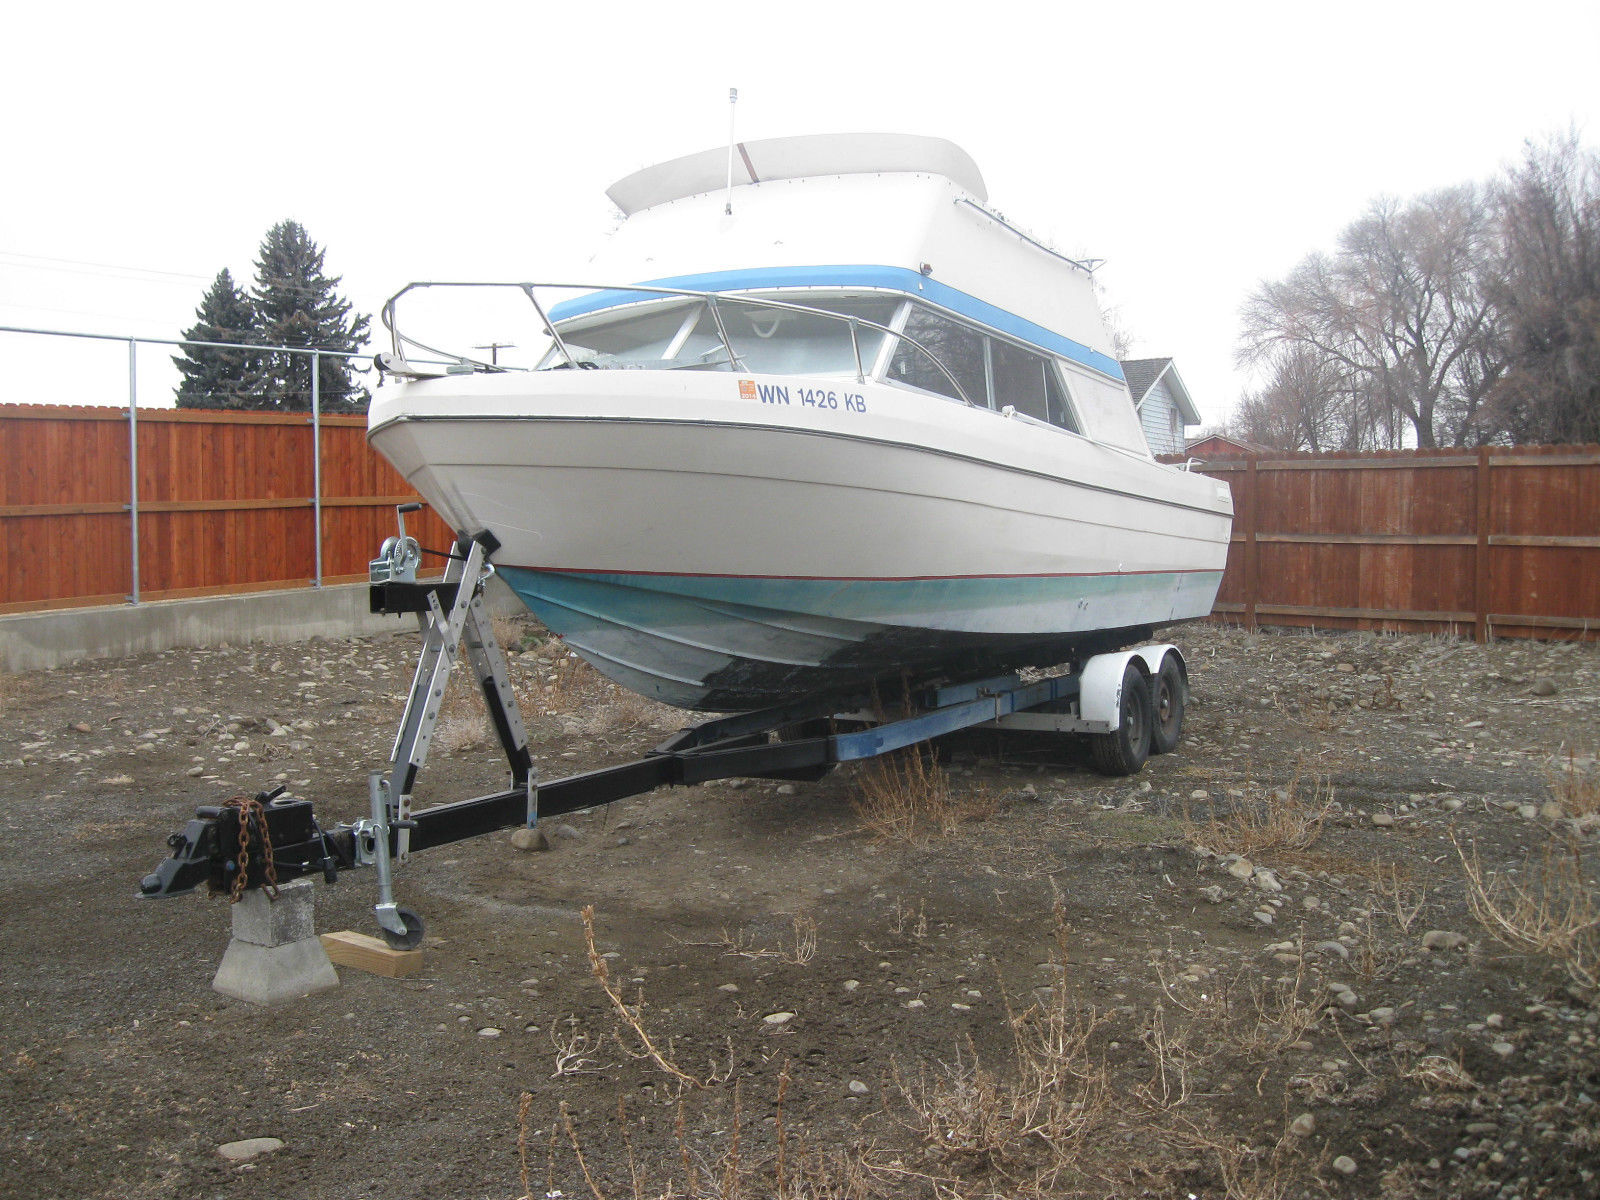 Bayliner Victoria 1973 for sale for $2,500 - Boats-from ...